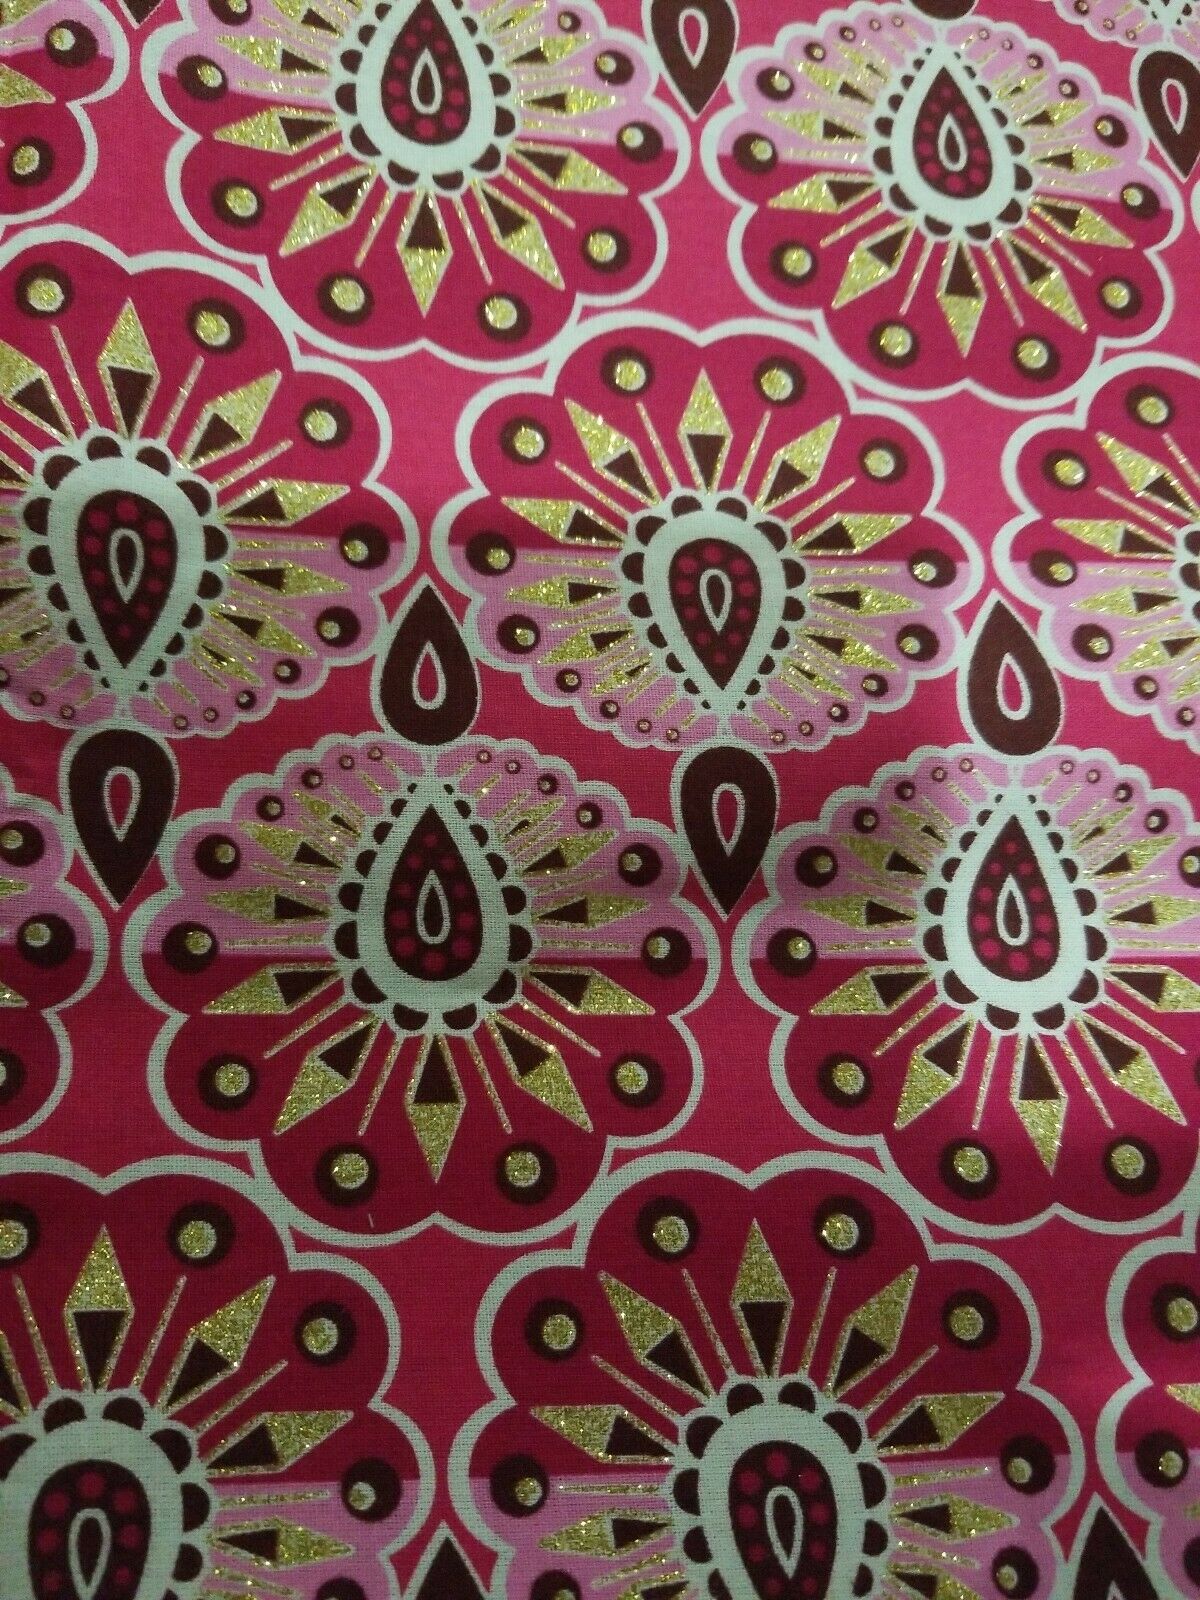 High fashion MULTICOLOR African Wax Print in Pink  Fabric ~66inches×23"~$11